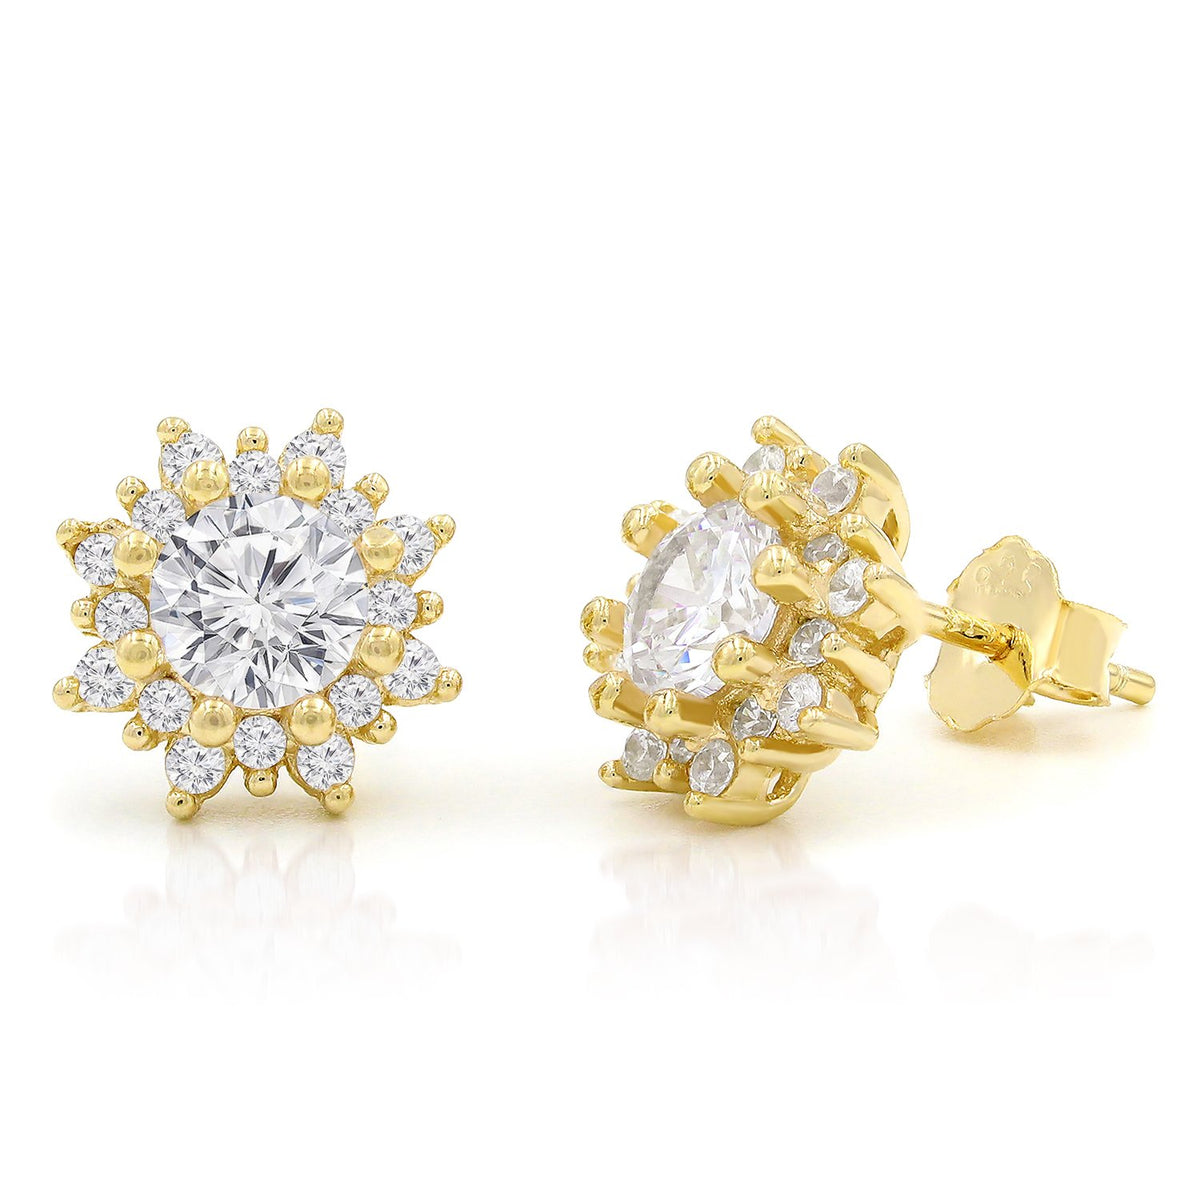 925 Sterling Silver Gold Plated Micro Pave Starburst Stud Earrings